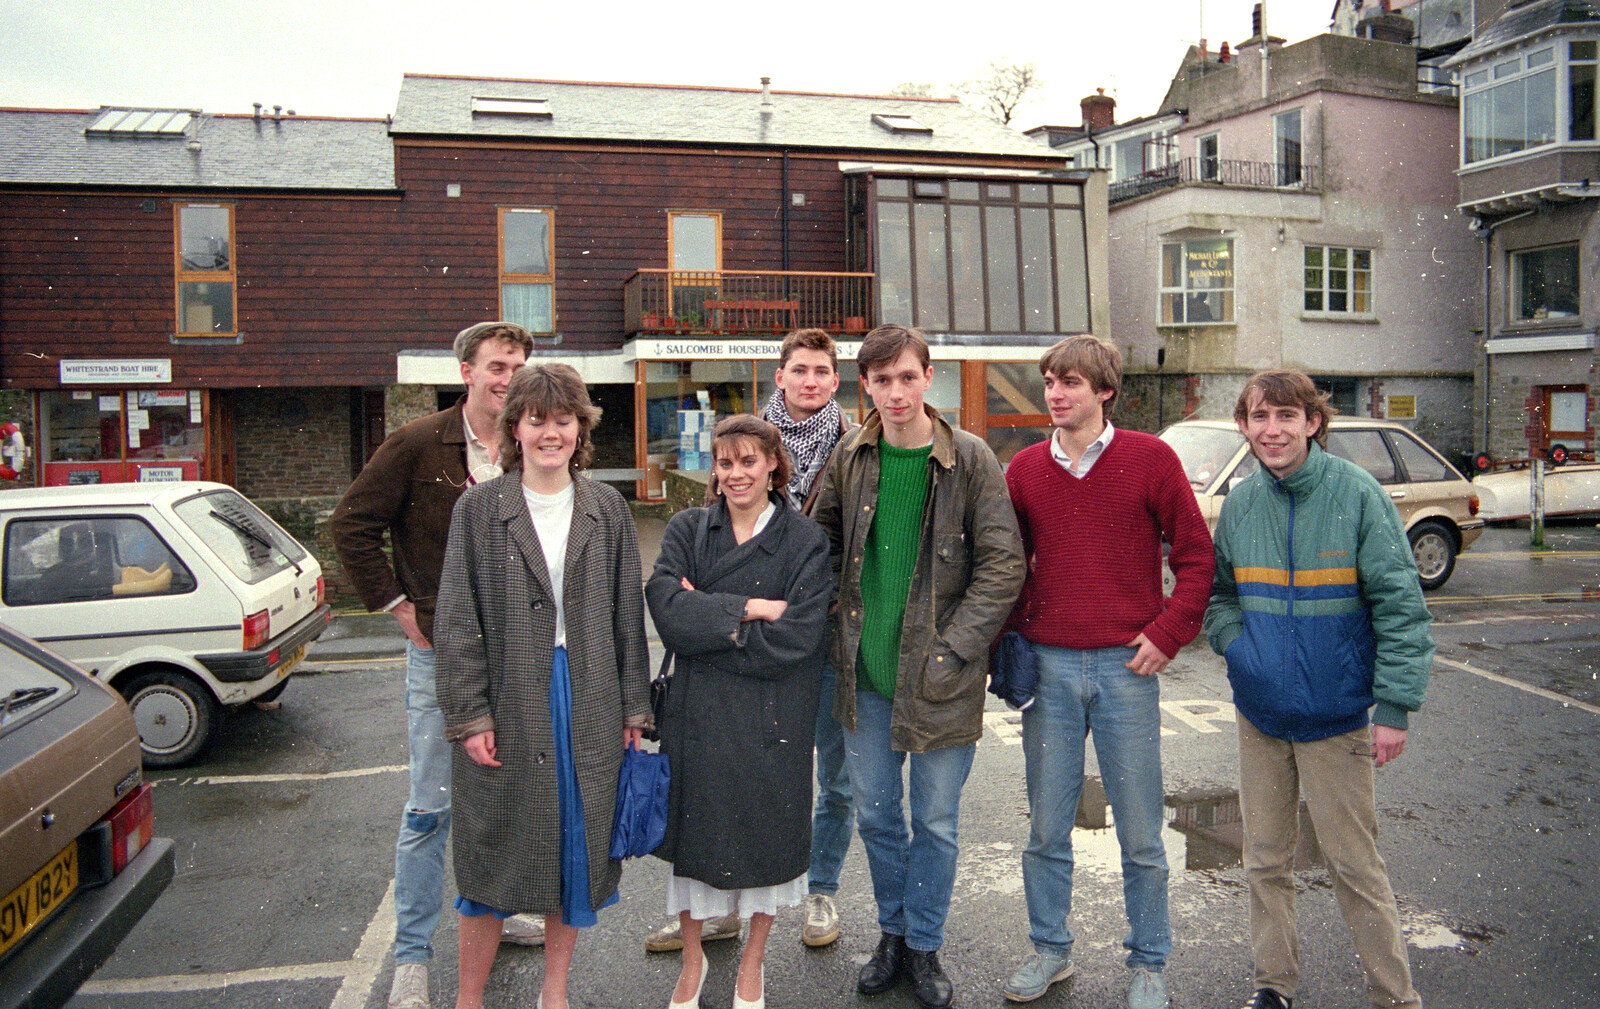 A group photo after the Salcombe photo shoot from Uni: The Plymouth Polytechnic Satique Project, Salcombe and Plymouth - 10th May 1986